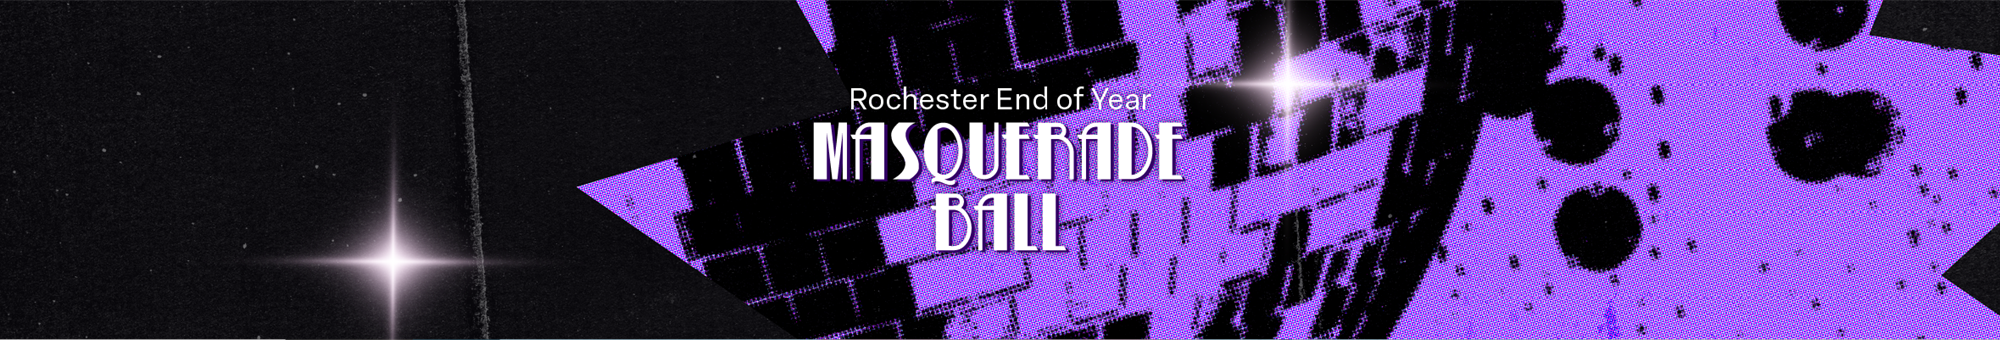 It's the end of an era! Reserve your Rochester Masquerade Ball Tickets here and see Rochester Campus out in style.  (Rochester Students and Staff Only)